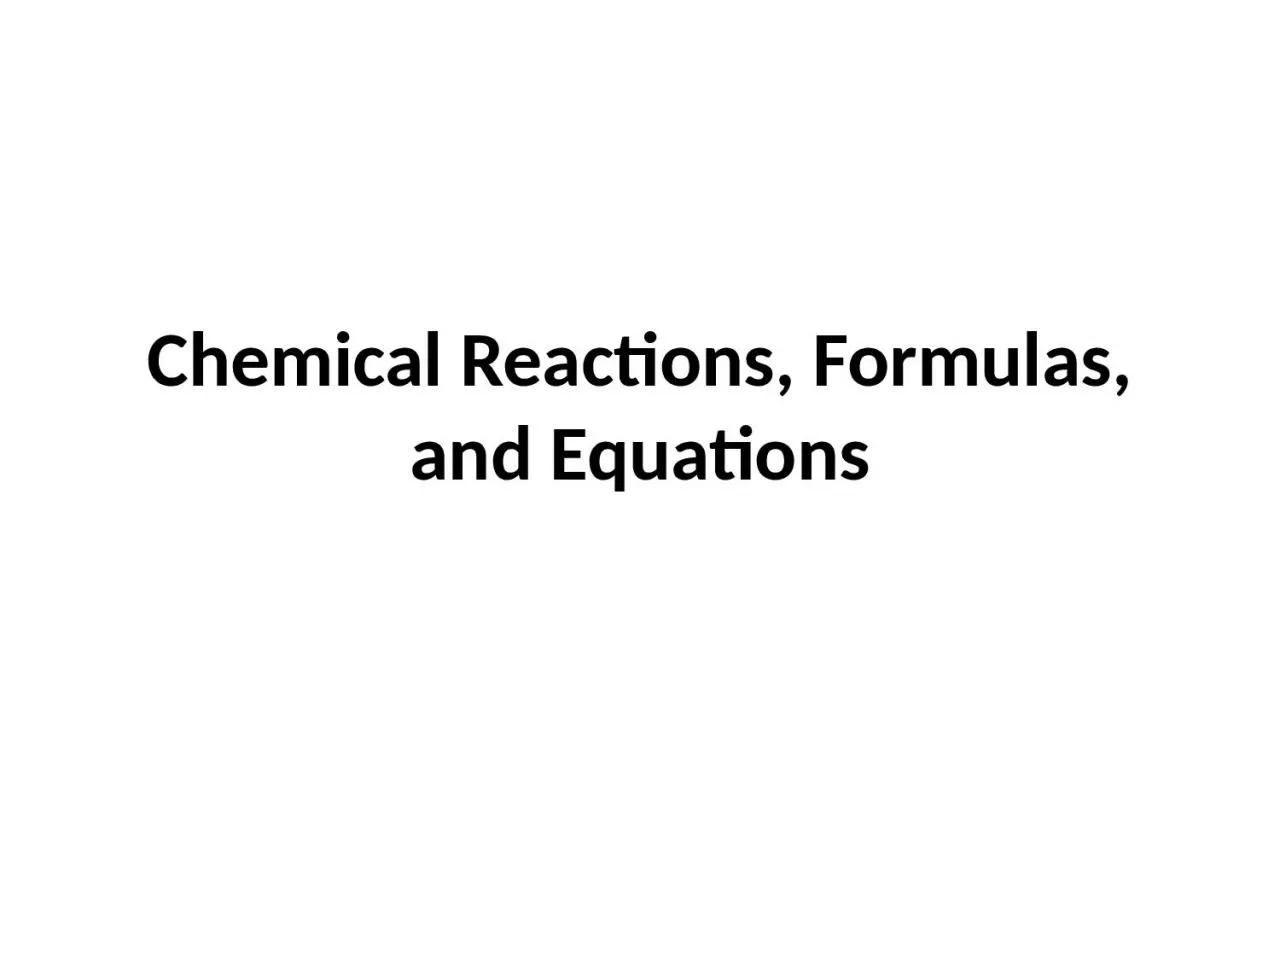 Chemical Reactions, Formulas, and Equations